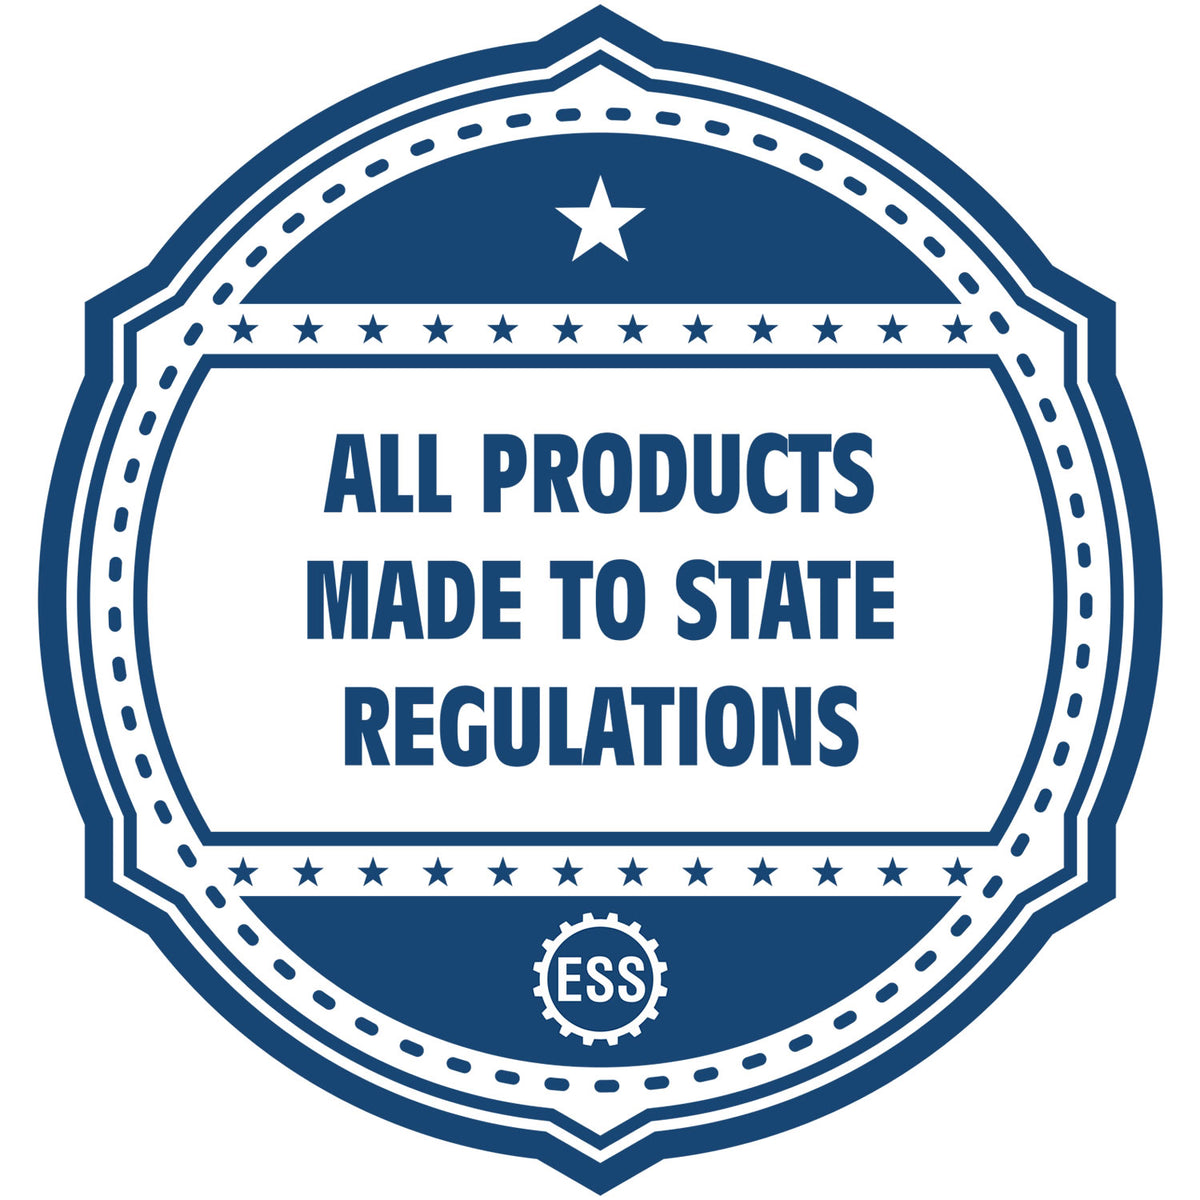 An icon or badge element for the Wooden Handle Oklahoma State Seal Notary Public Stamp showing that this product is made in compliance with state regulations.